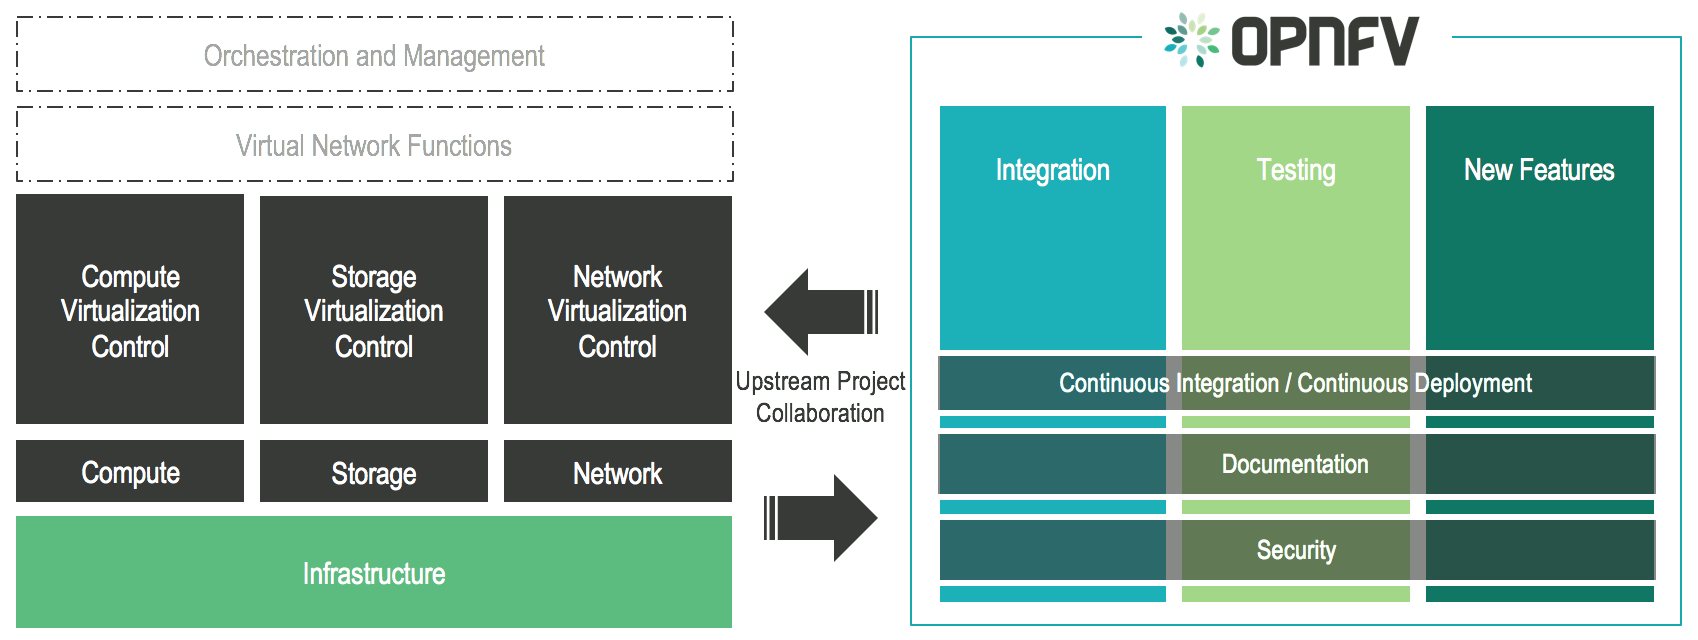 Overview infographic of the opnfv platform and projects.